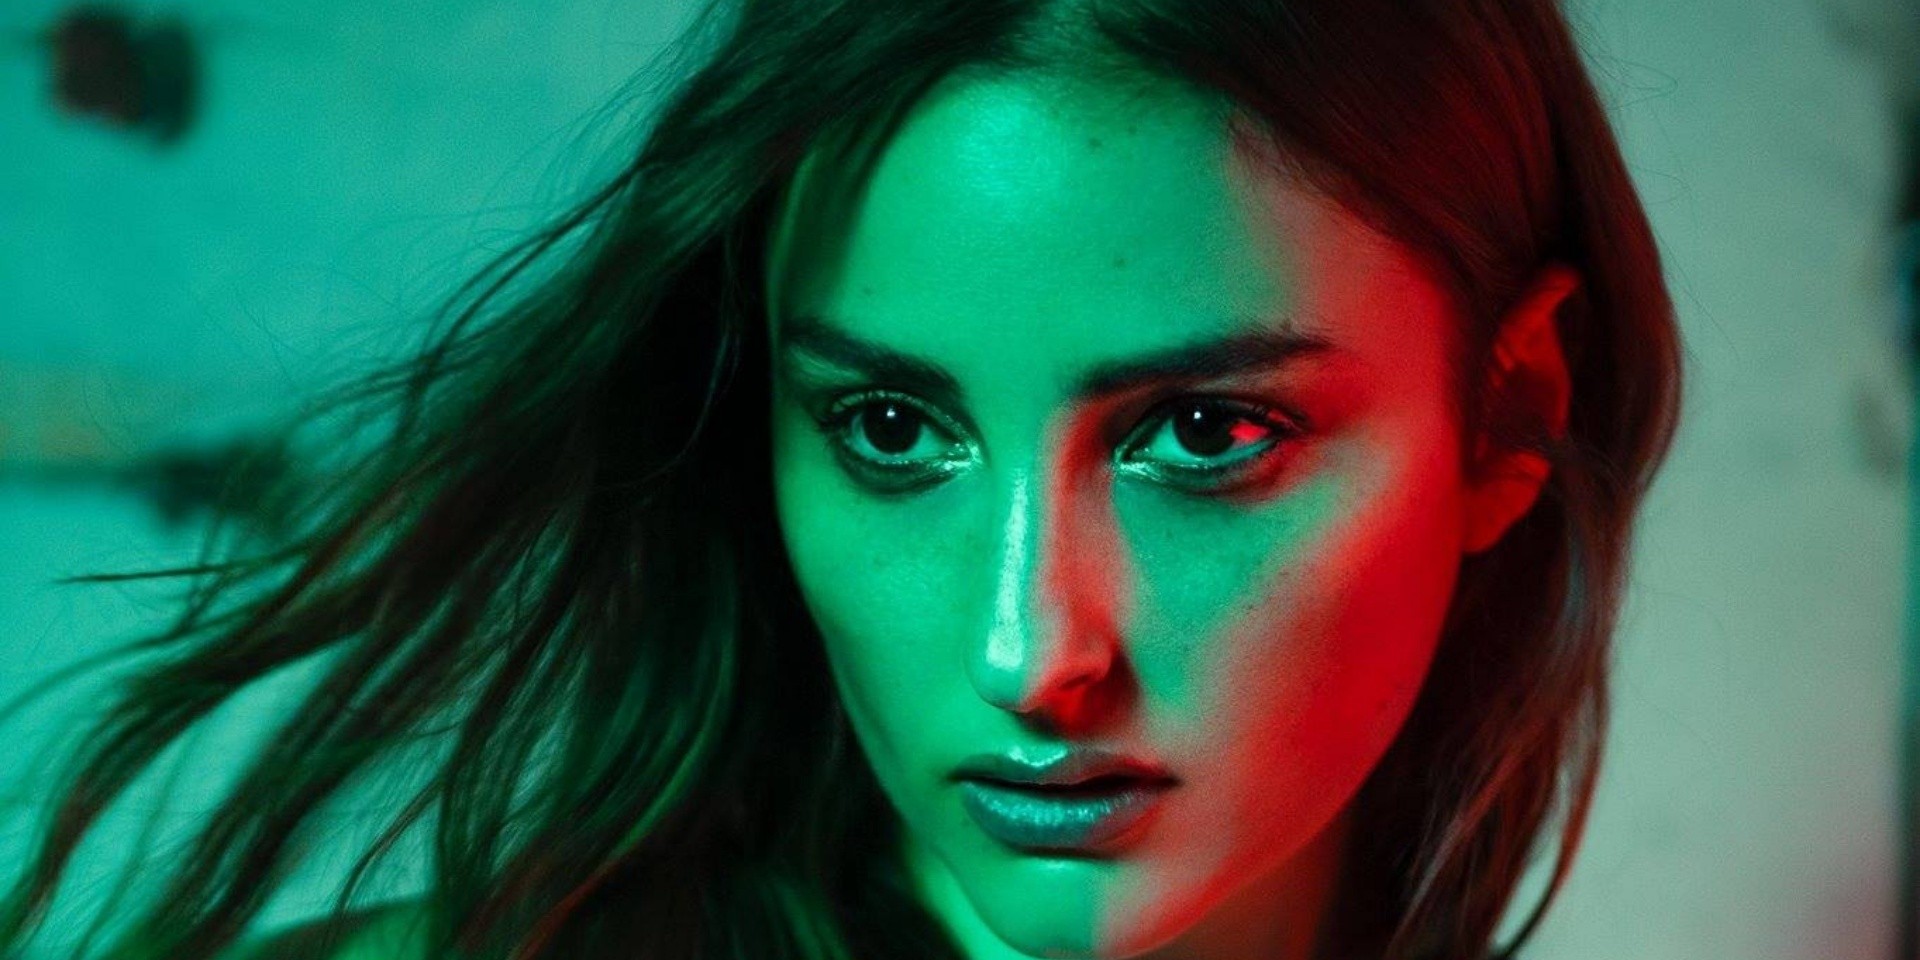 Banks releases haunting new single 'Gimme' – listen